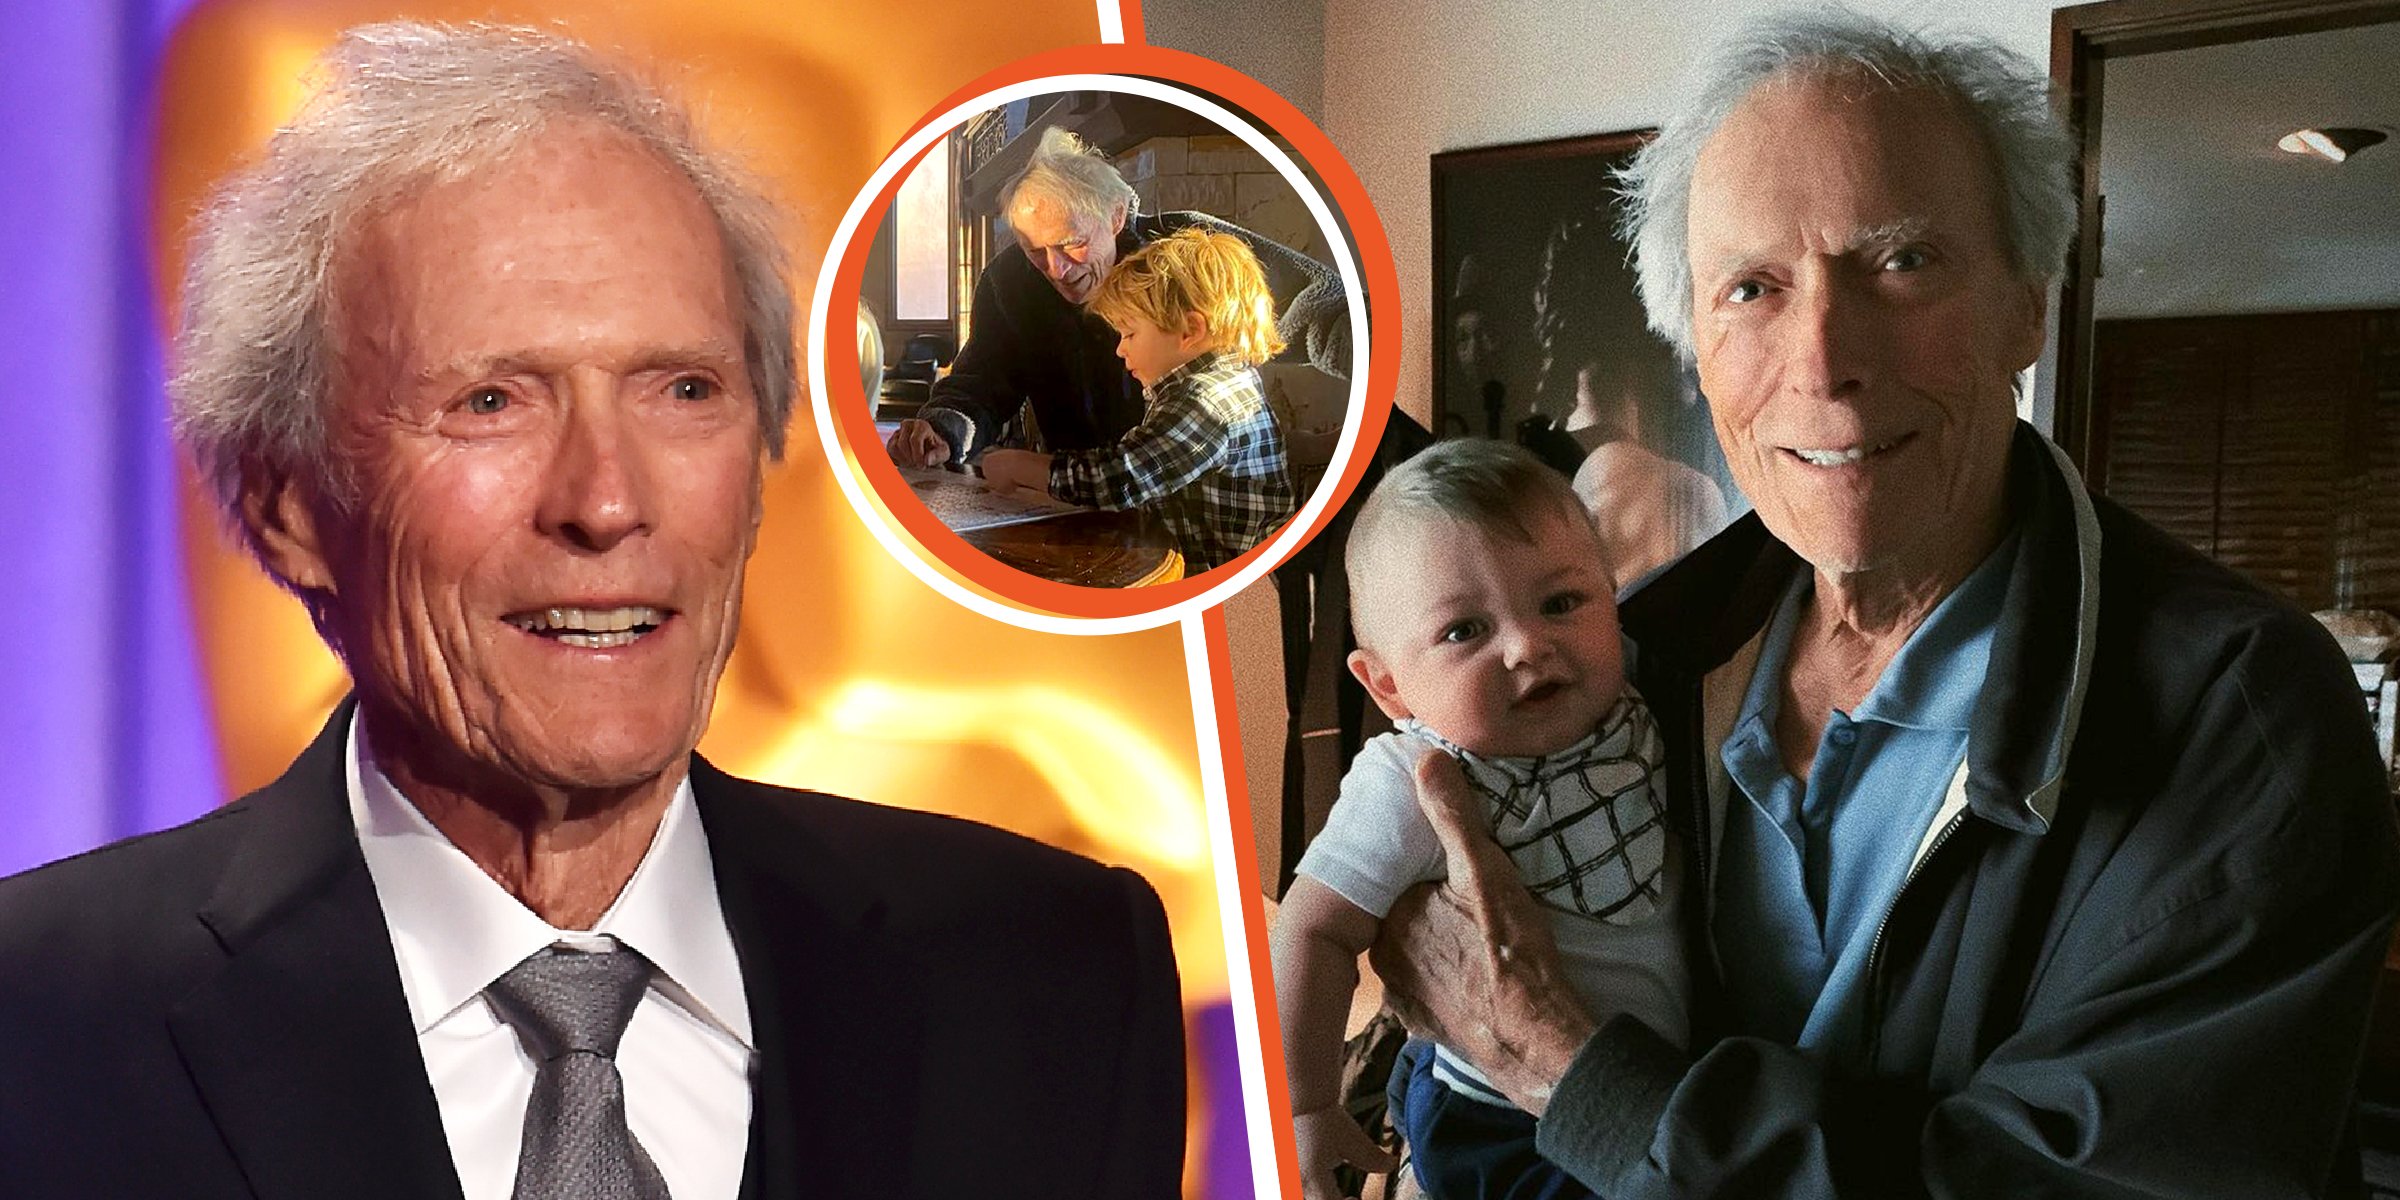 Clint Eastwood, 2018 | Clint Eastwood and One of His Grandsons, 2022 | Clint Eastwood and Titan, 2021 | Source: Instagram.com/francescaeastwood | Getty Images